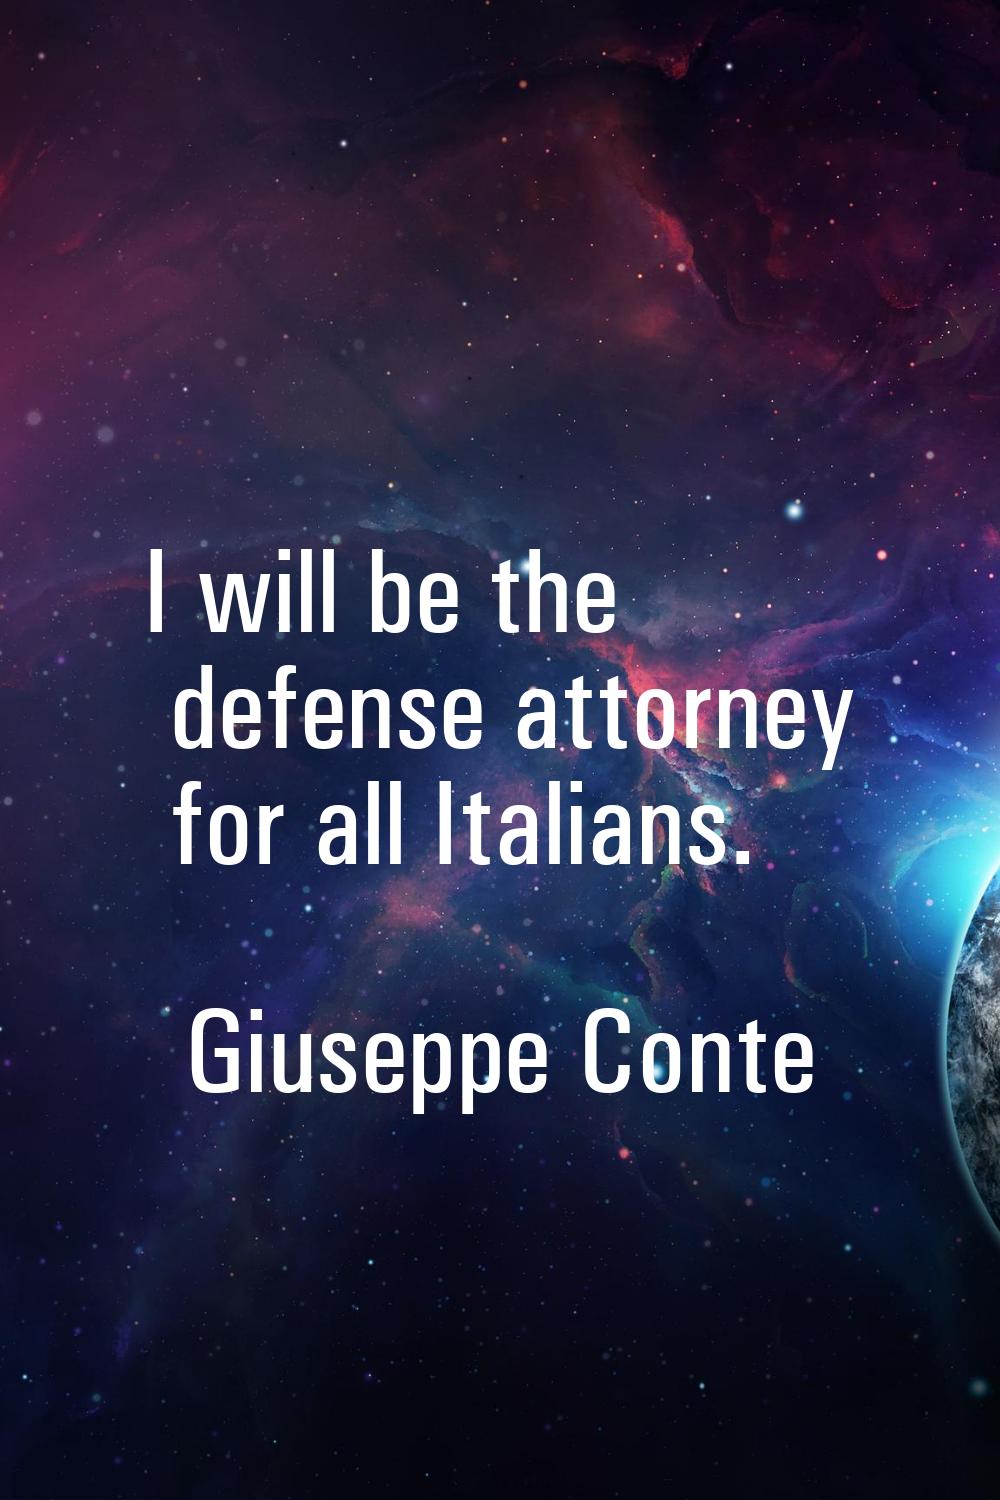 I will be the defense attorney for all Italians.